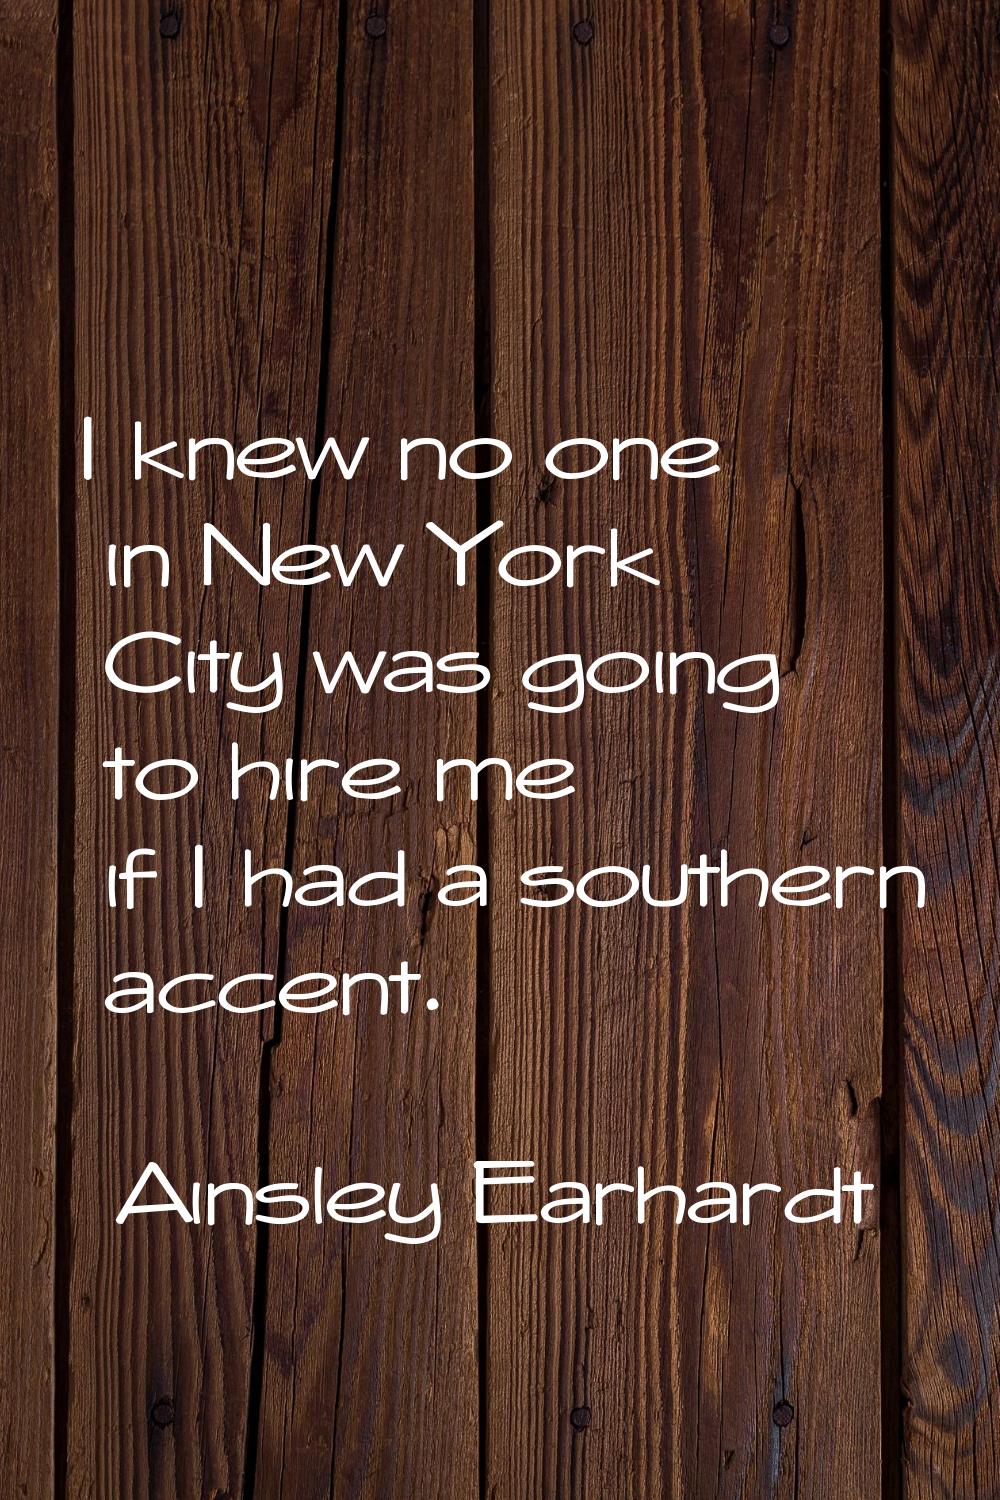 I knew no one in New York City was going to hire me if I had a southern accent.